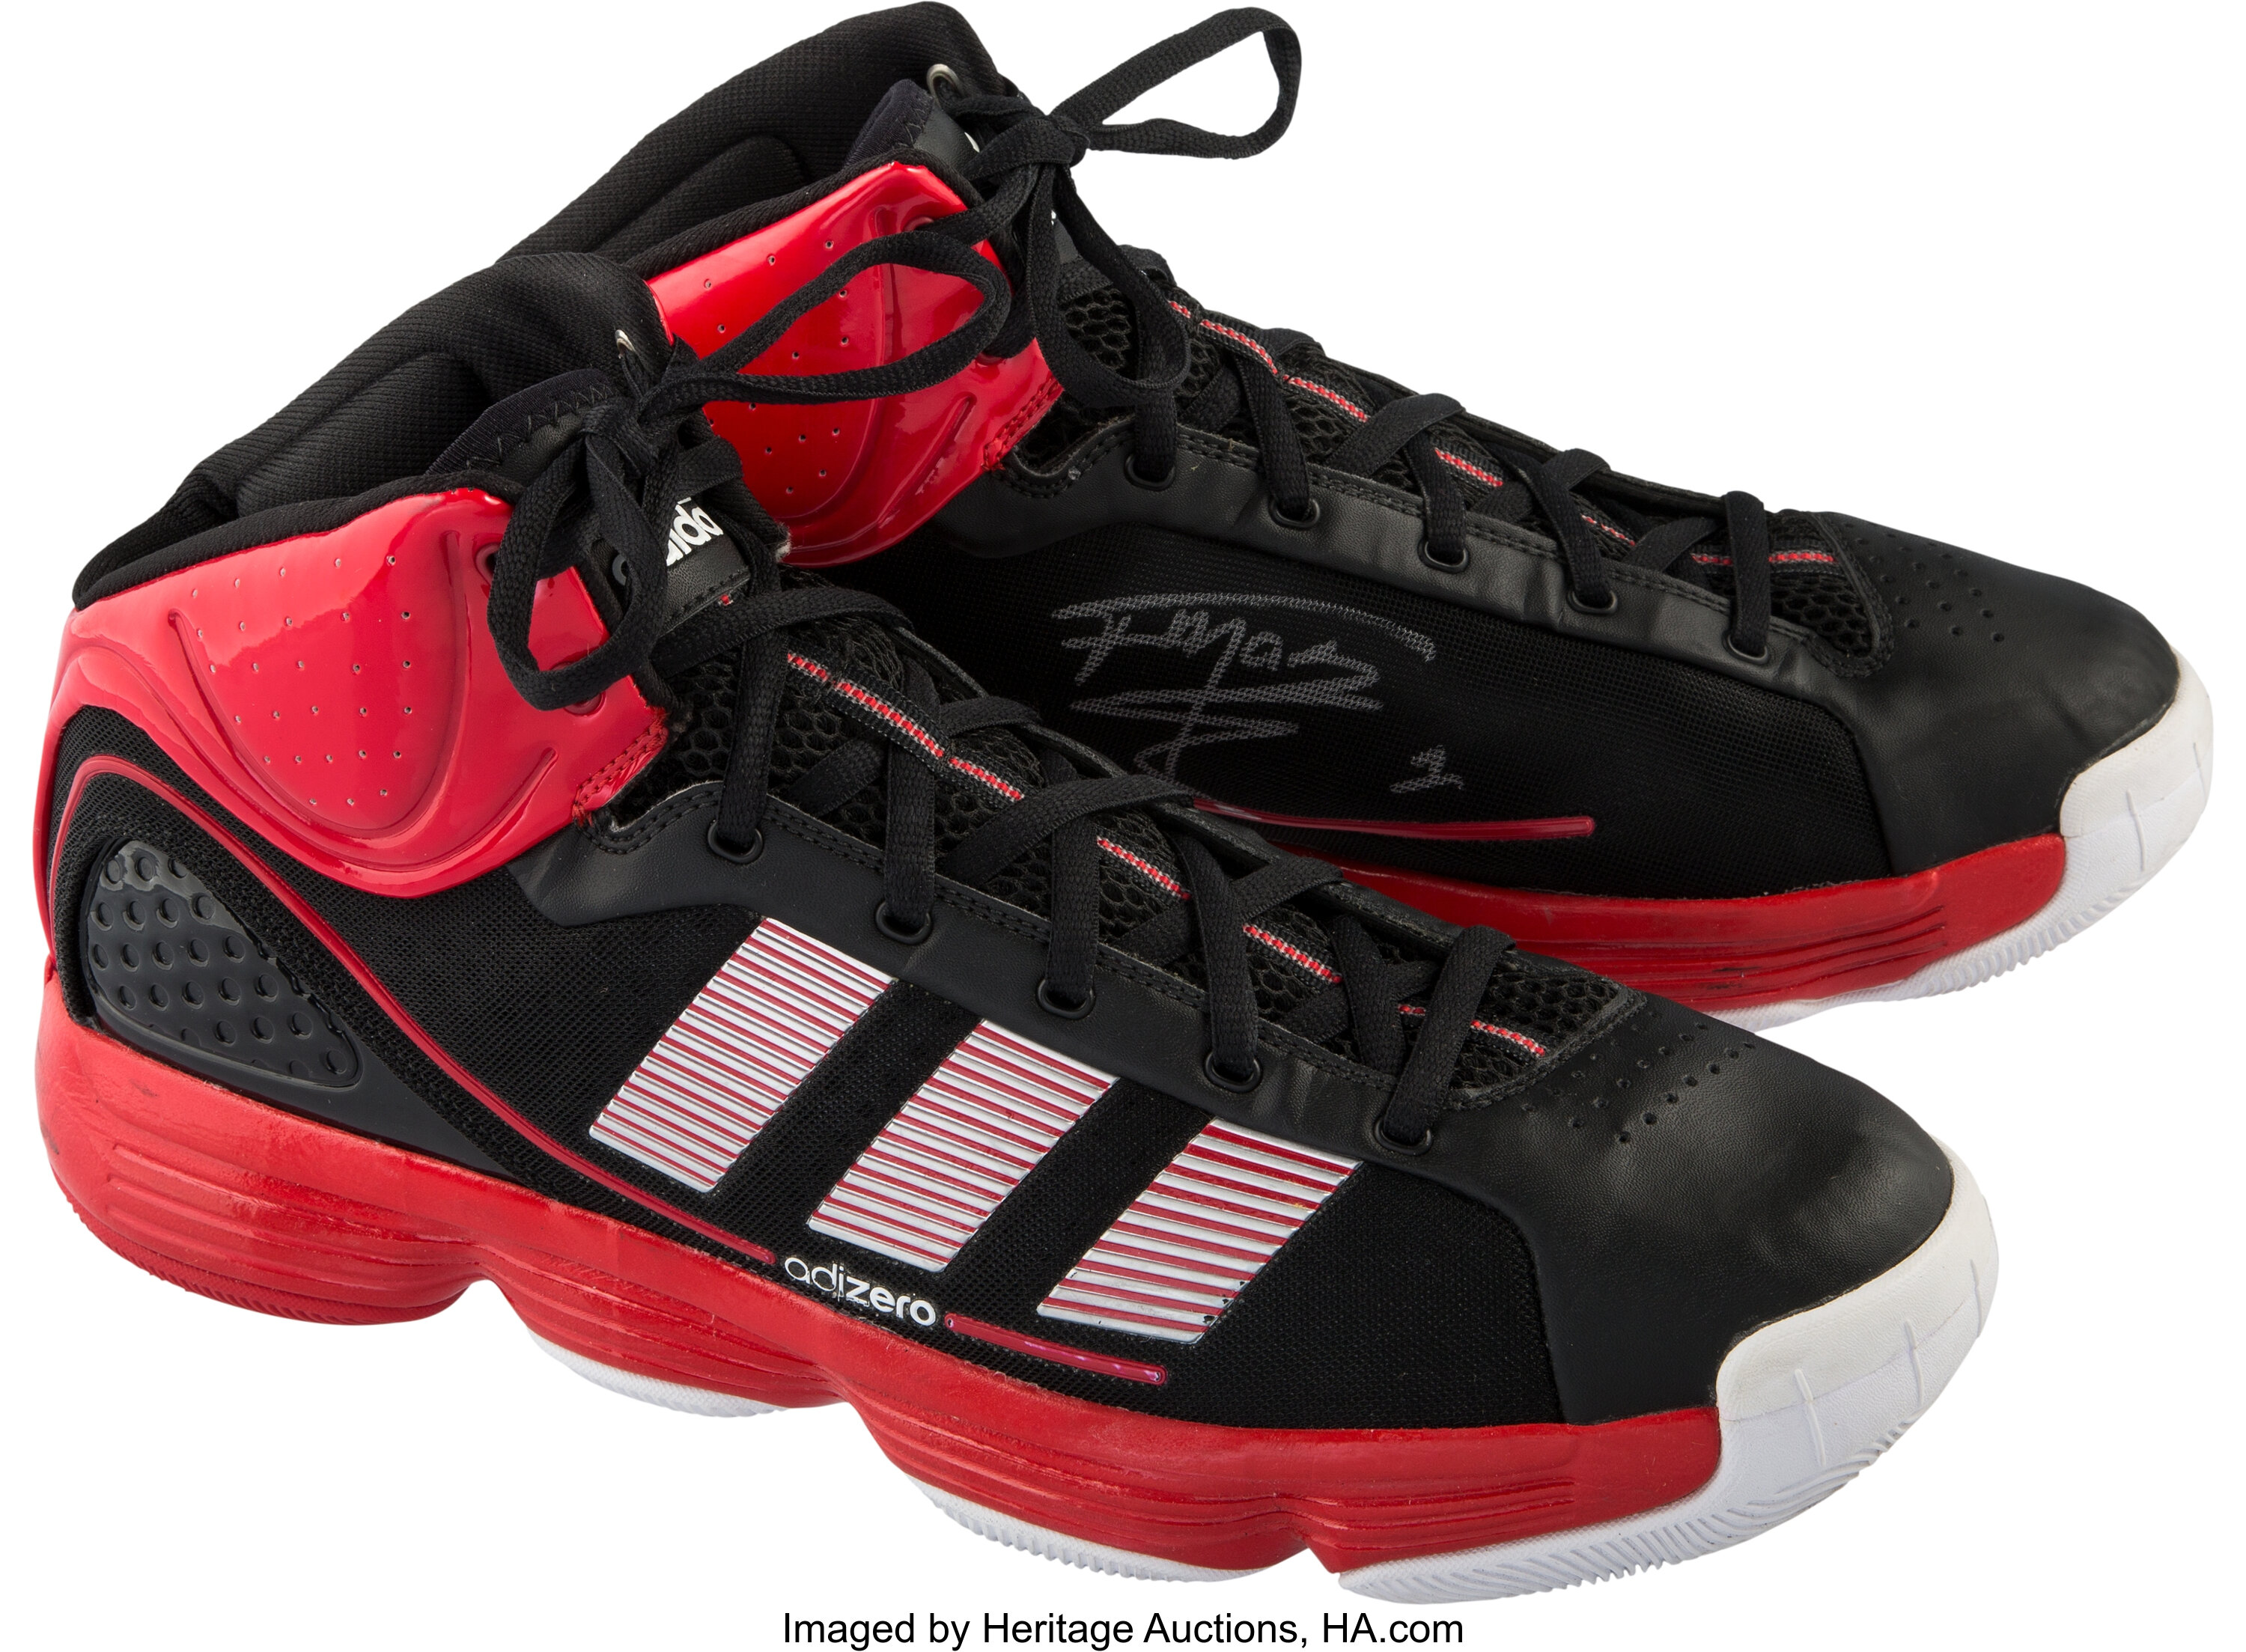 Tracy McGrady Shoes: What is he wearing and where to buy them